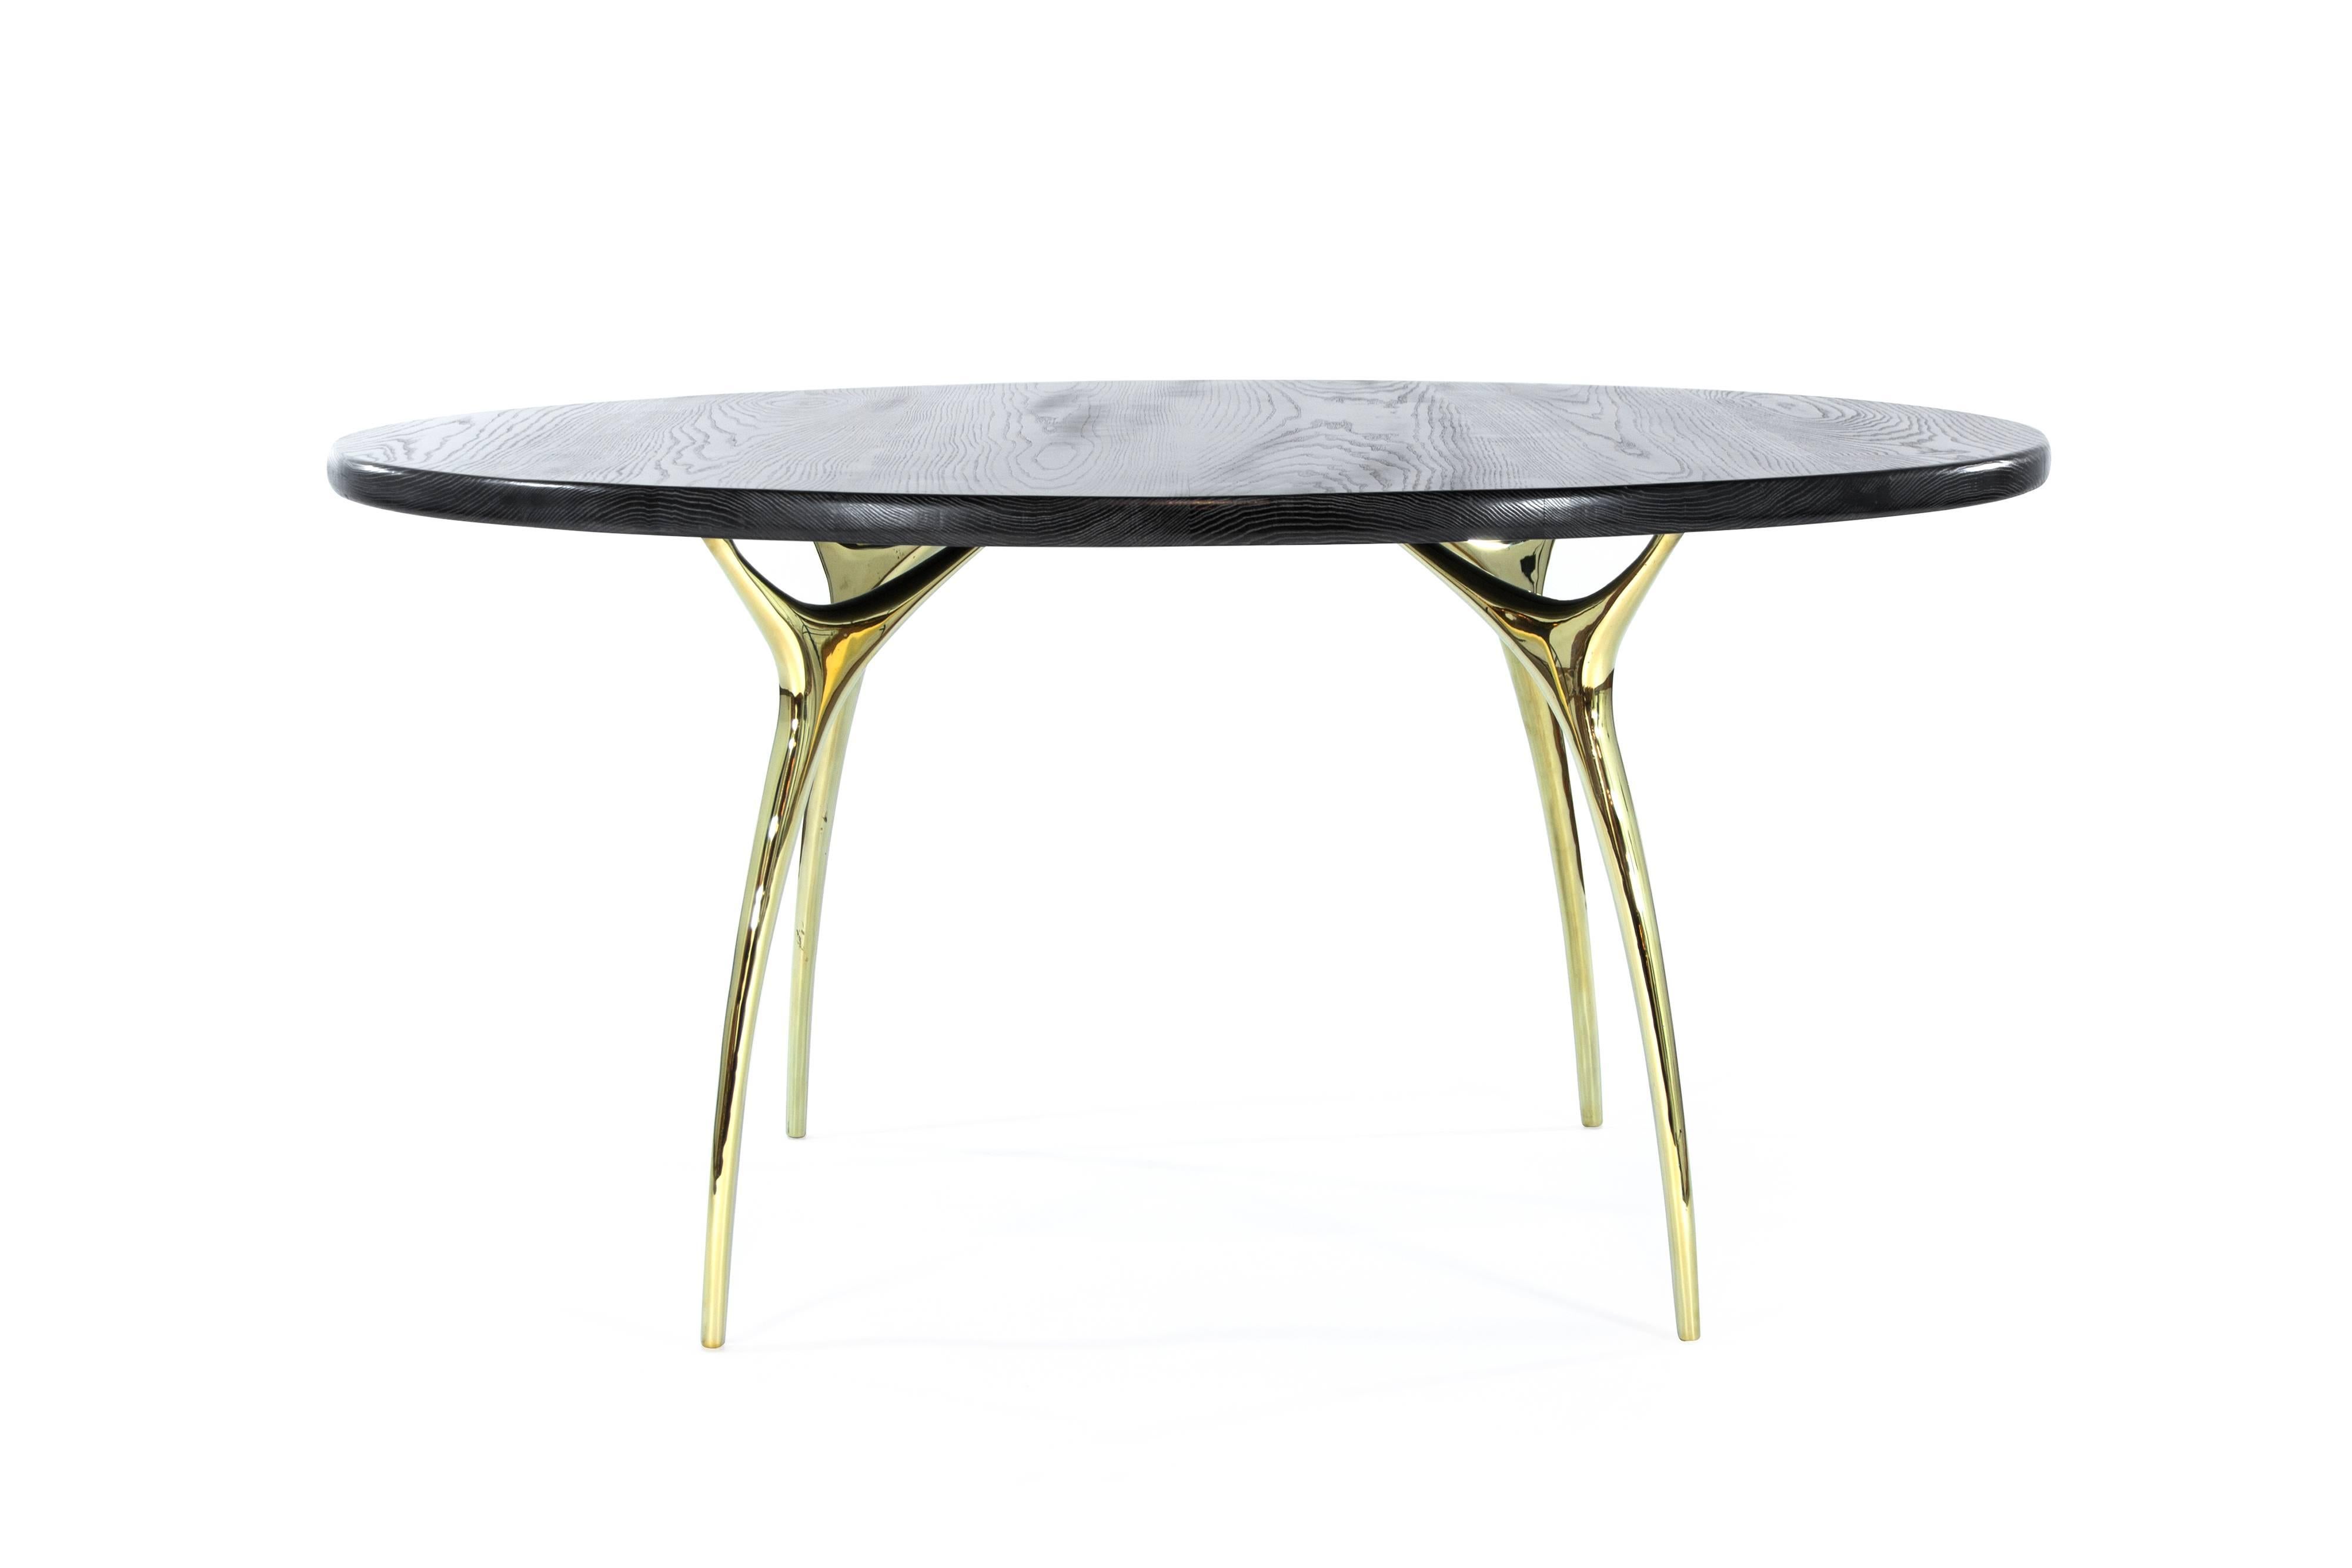 -Crescent Collection Games Table-

Sculptural hand casted, solid brass legs shown here in a polished finish. Solid oak top done in black ceruse highlighting the beautifully pronounced grain. Available in custom sizes. Price listed as